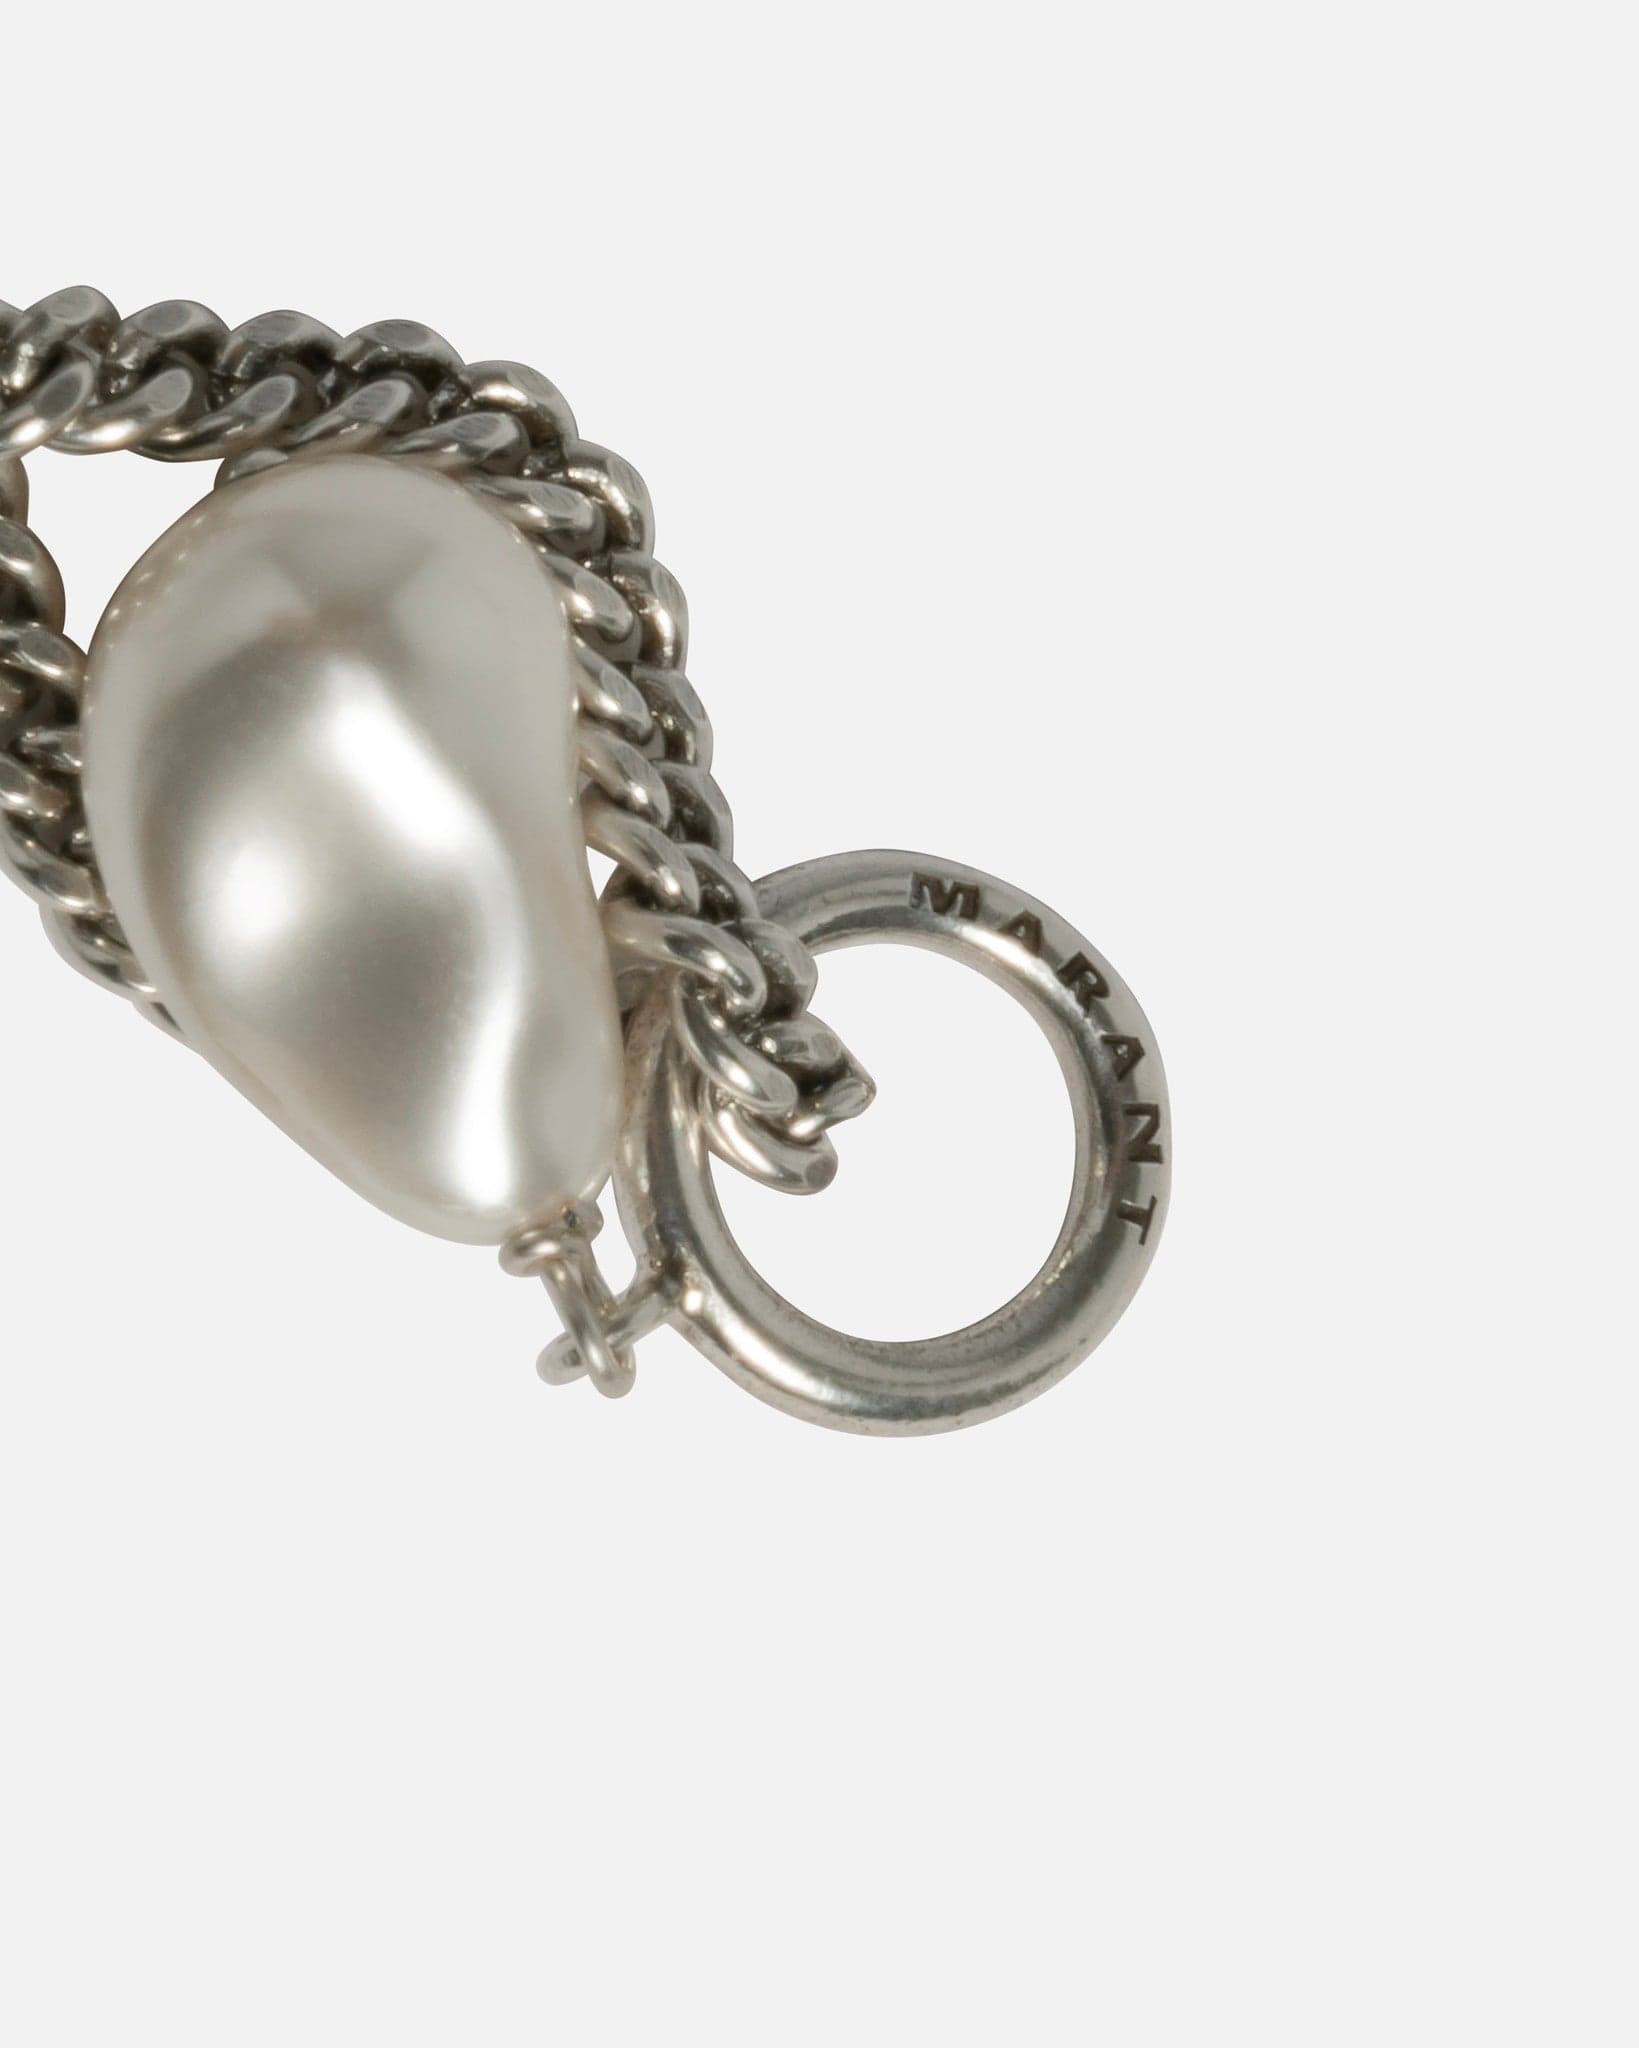 Isabel Marant Homme Jewelry Collier Necklace in Silver